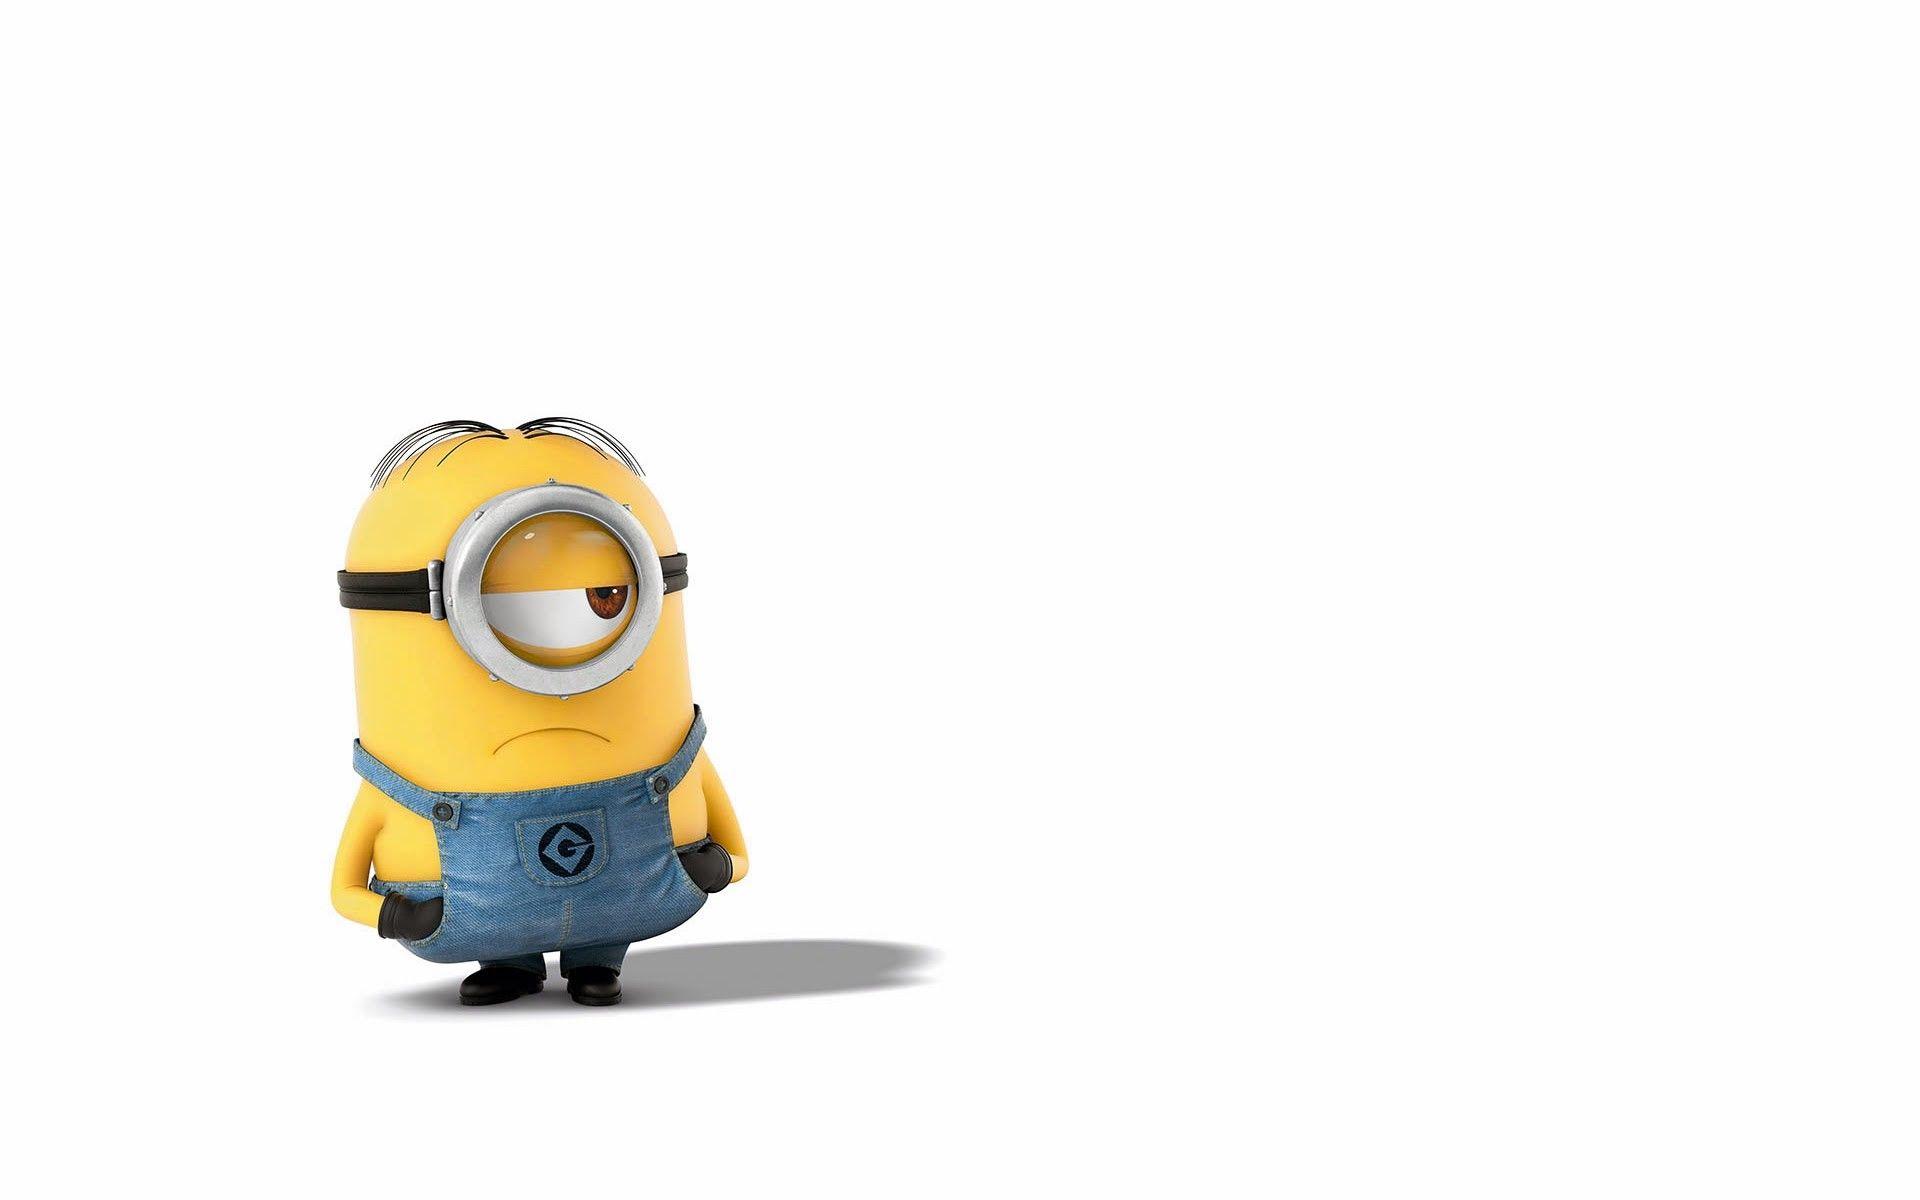  Backgrounds  Minion  Wallpaper  Cave